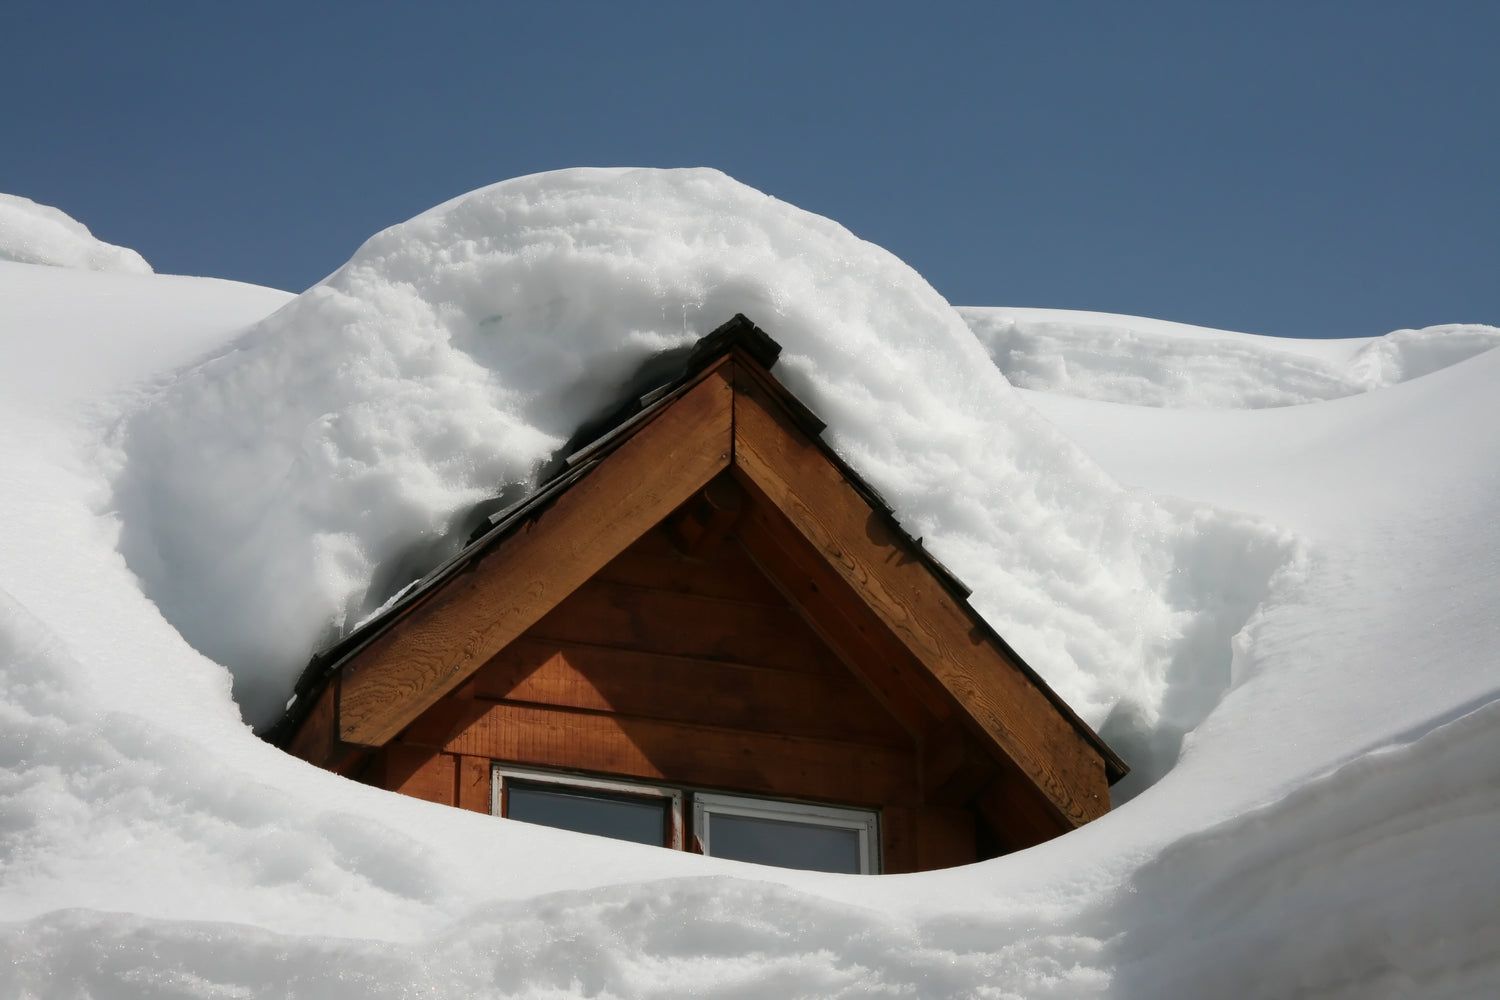 Can HeatTrak Snow Melting Mats Be a Solution for Rooftop Snow Accumulation?